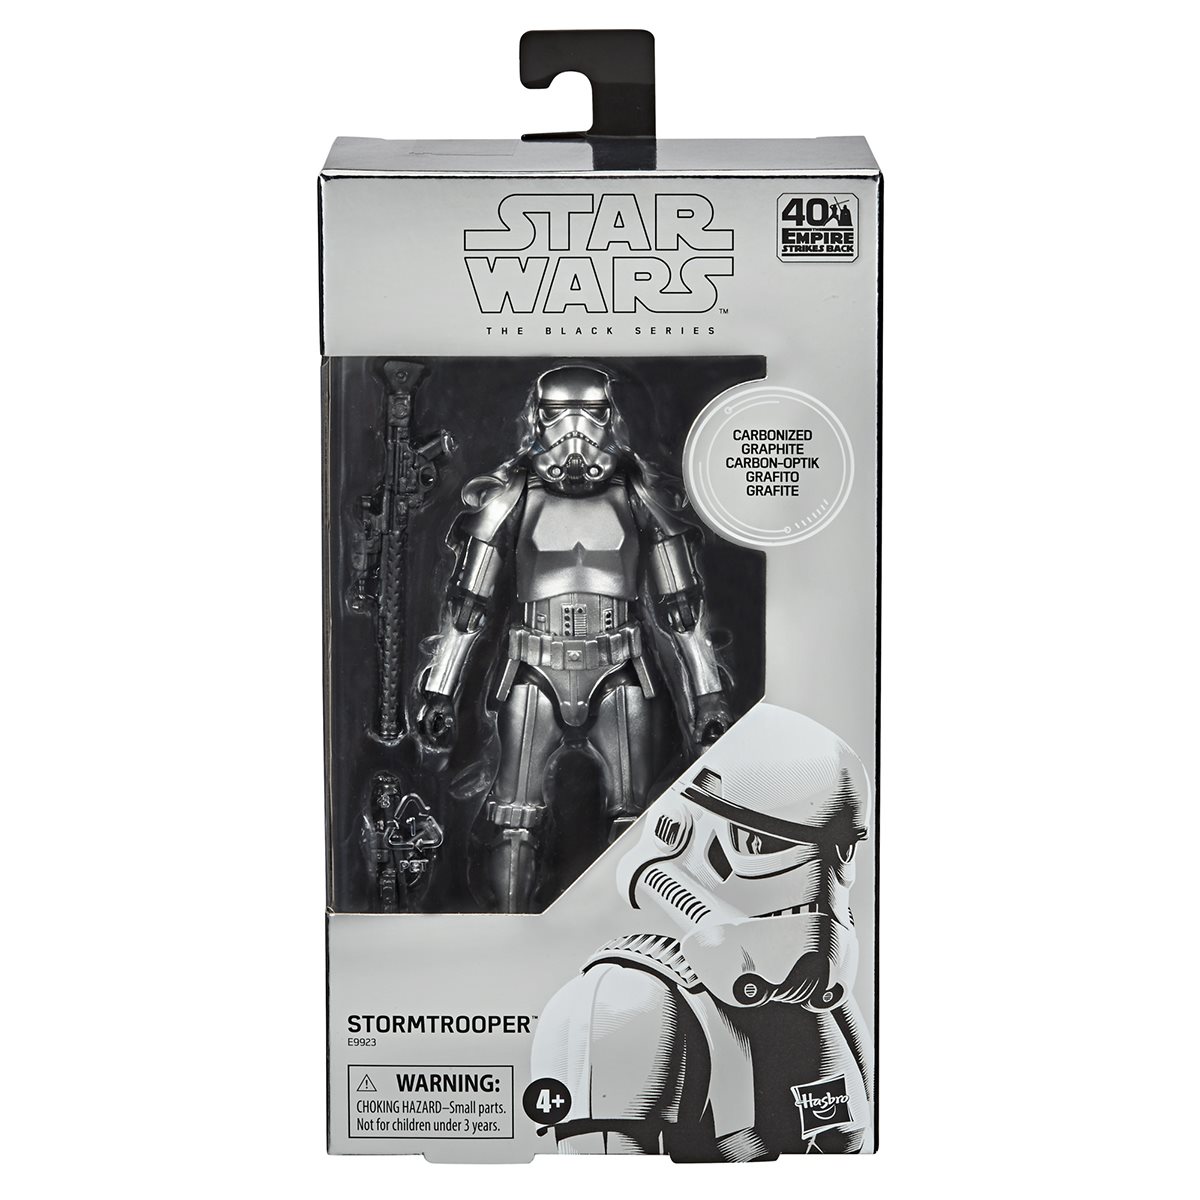 Hasbro Star Wars The Black Series Carbonized Collection Stormtrooper 6 inch Action Figure E9923 for sale online 